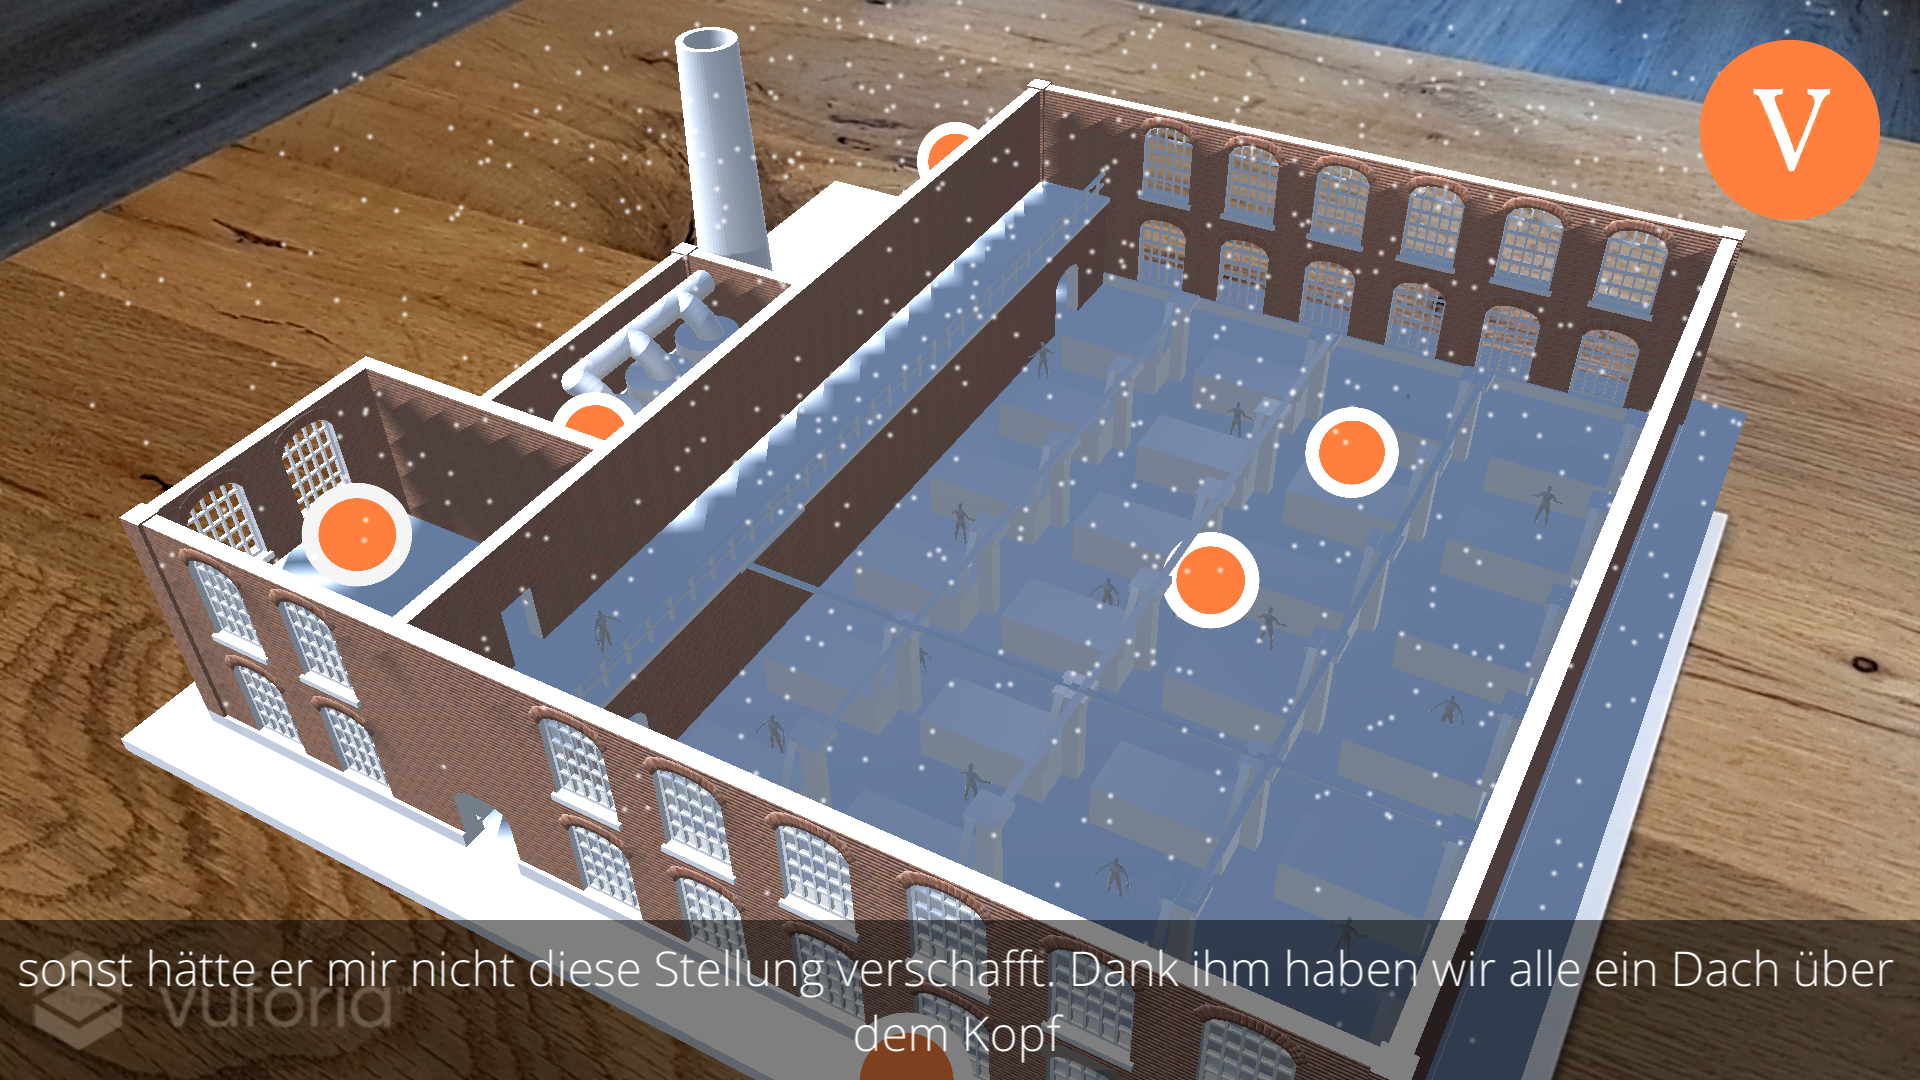 Screenshot of yARn that shows a 3D rendered factory projected on a wooden table from the perspective of the foreman. There are several orange colored points of interest inside the factory. At the bottom of the screen subtitles are displayed.